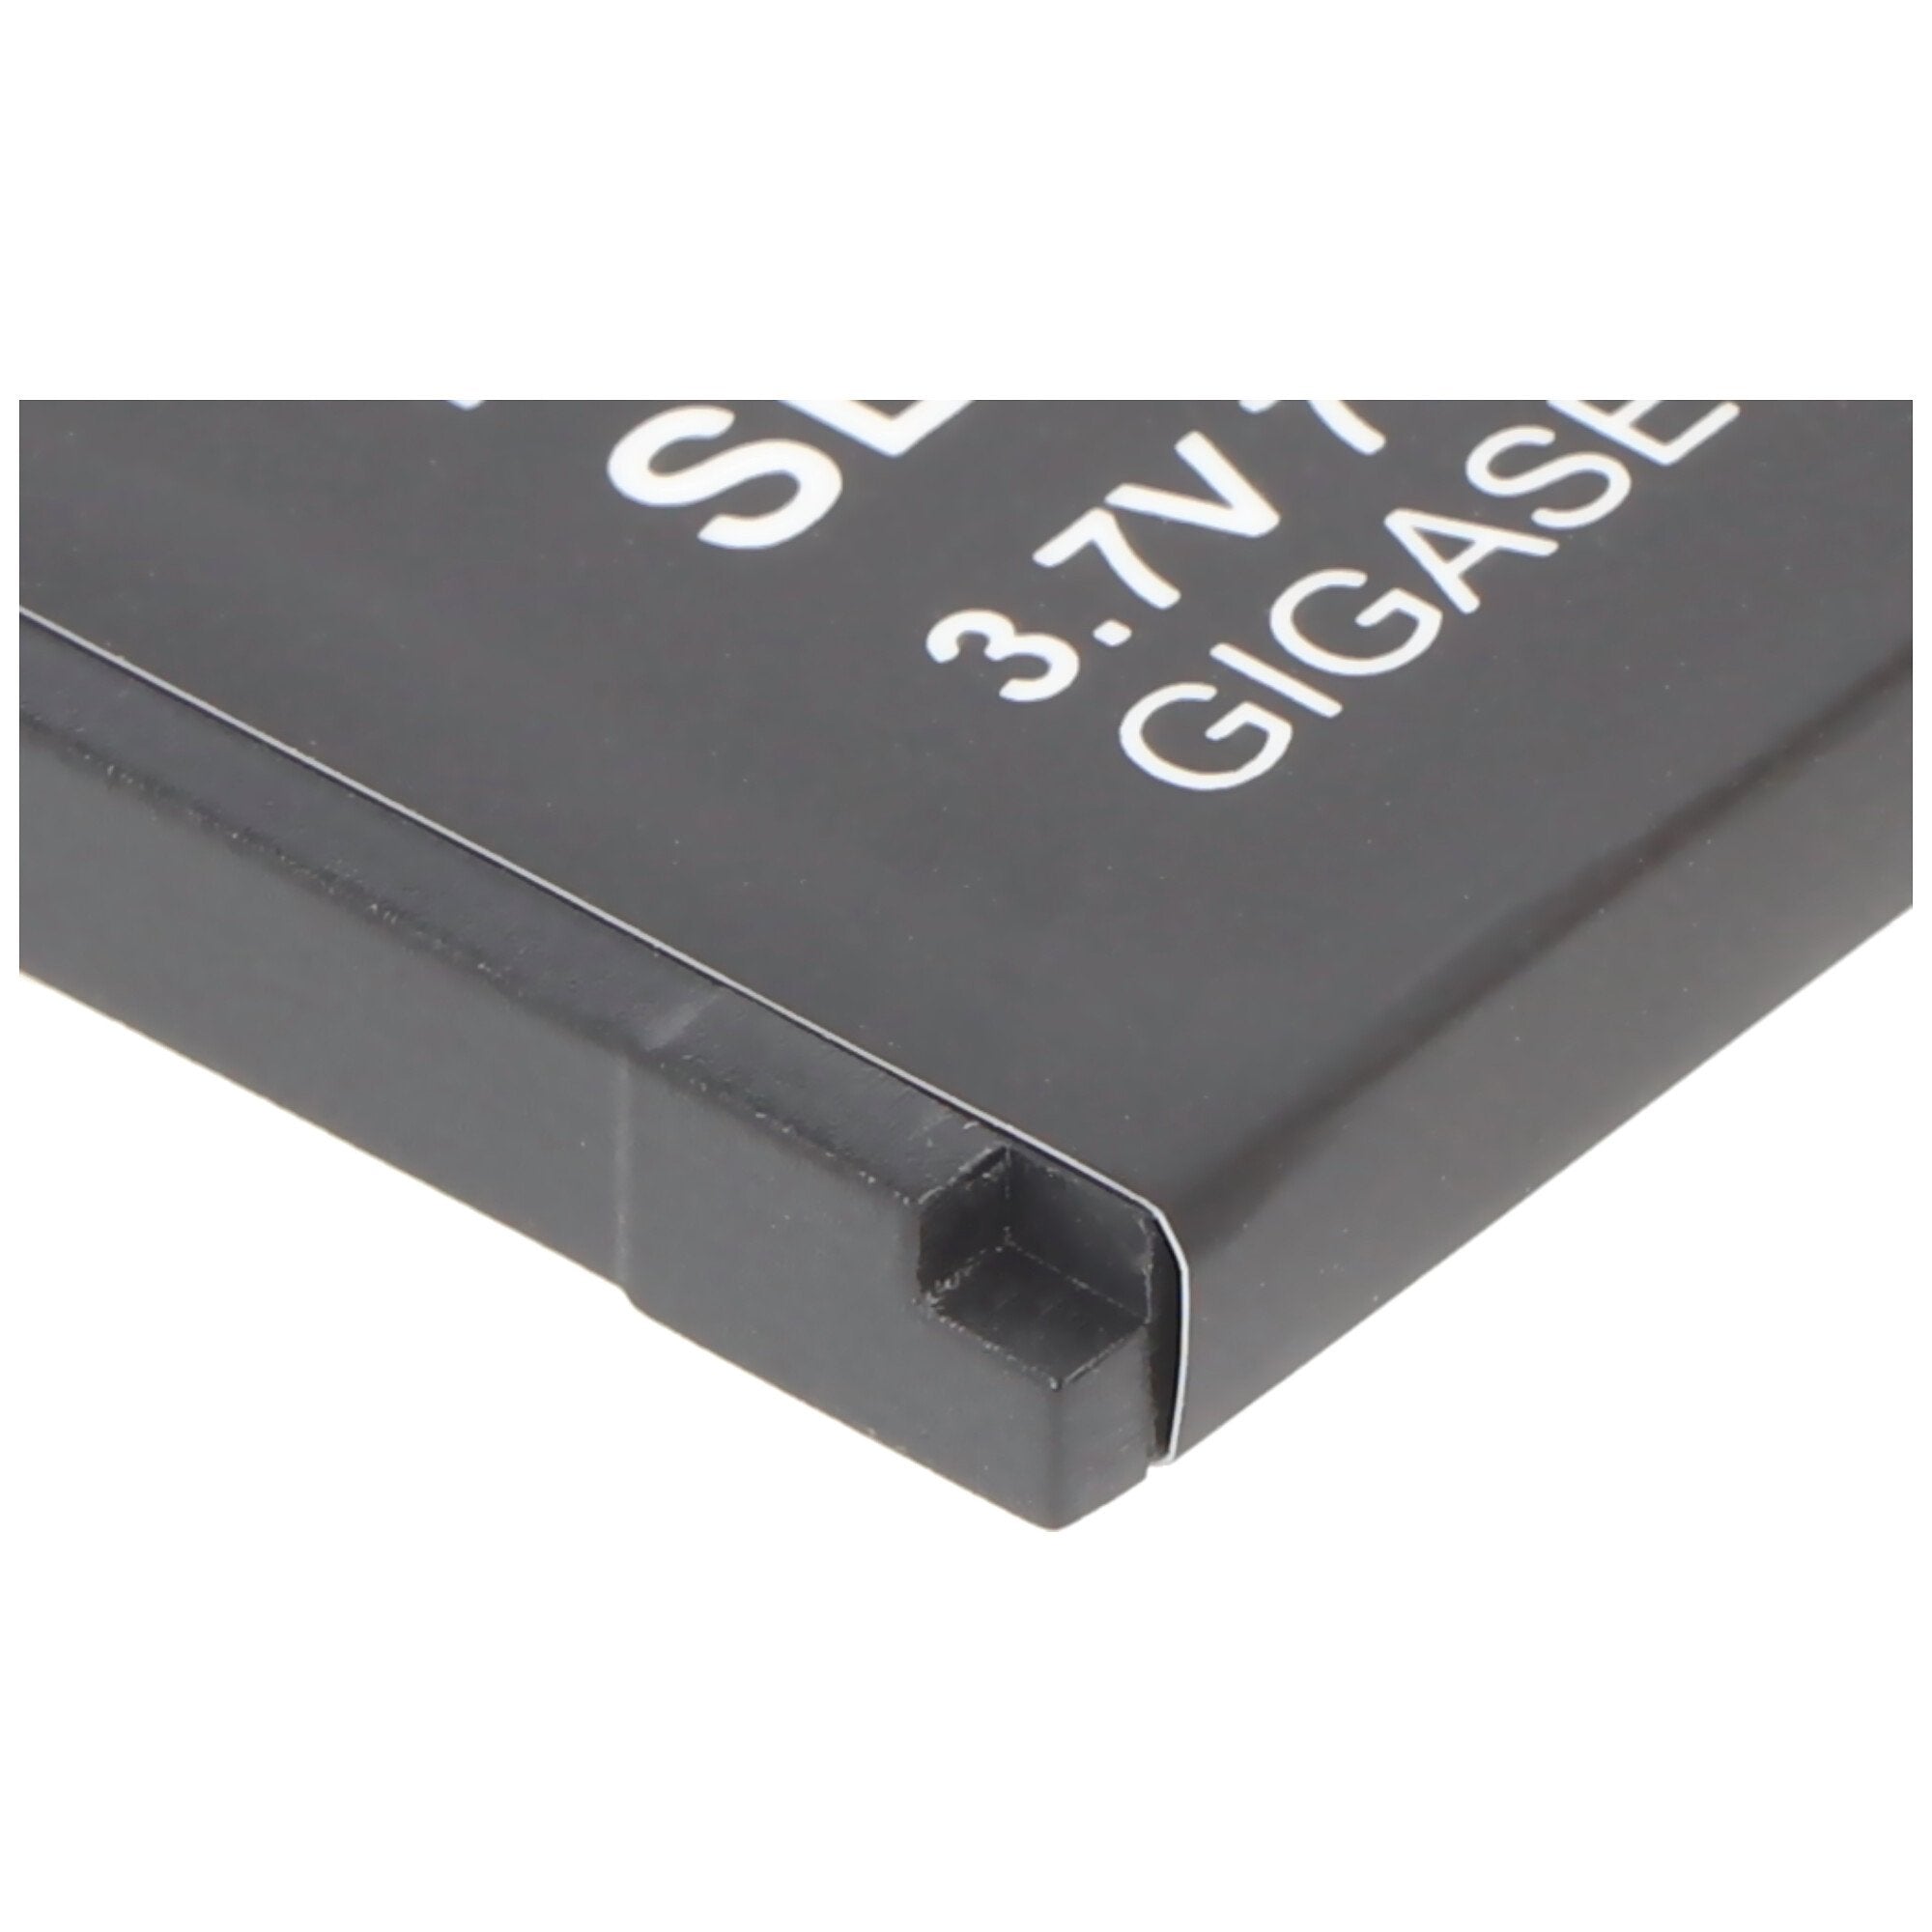 AccuCell battery suitable for Siemens SL4, SL400, SL78, SL780, SL785, SL788